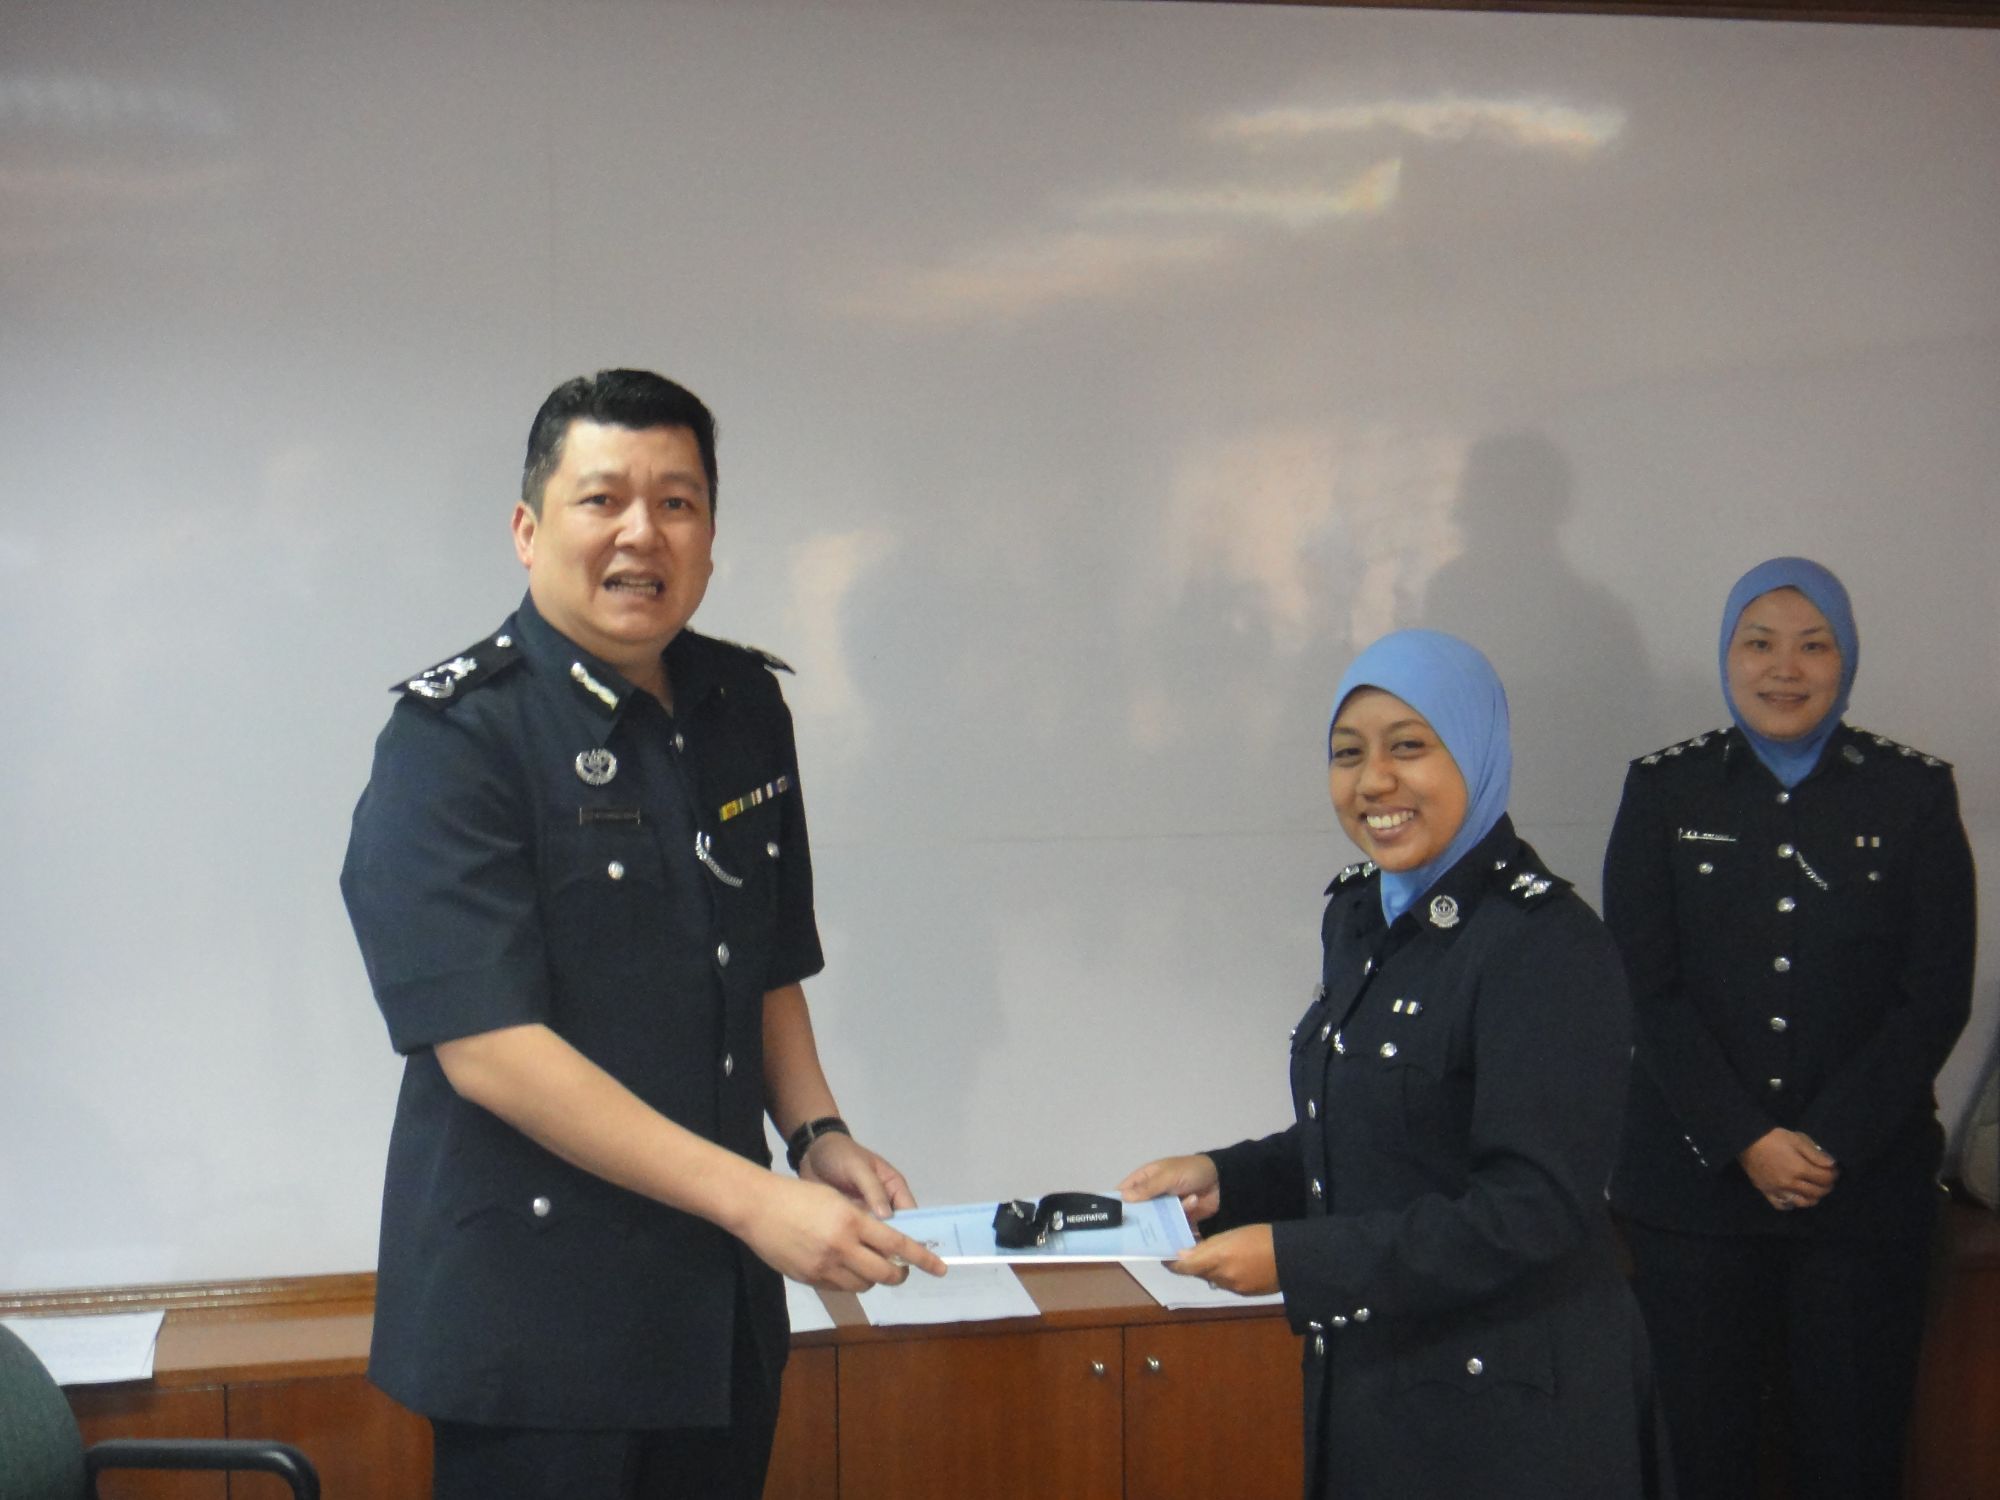 Certificates of completion and awards for HN course in Brunei awarded by the Now Commissioner of Police Dato Irwan Hambali. 